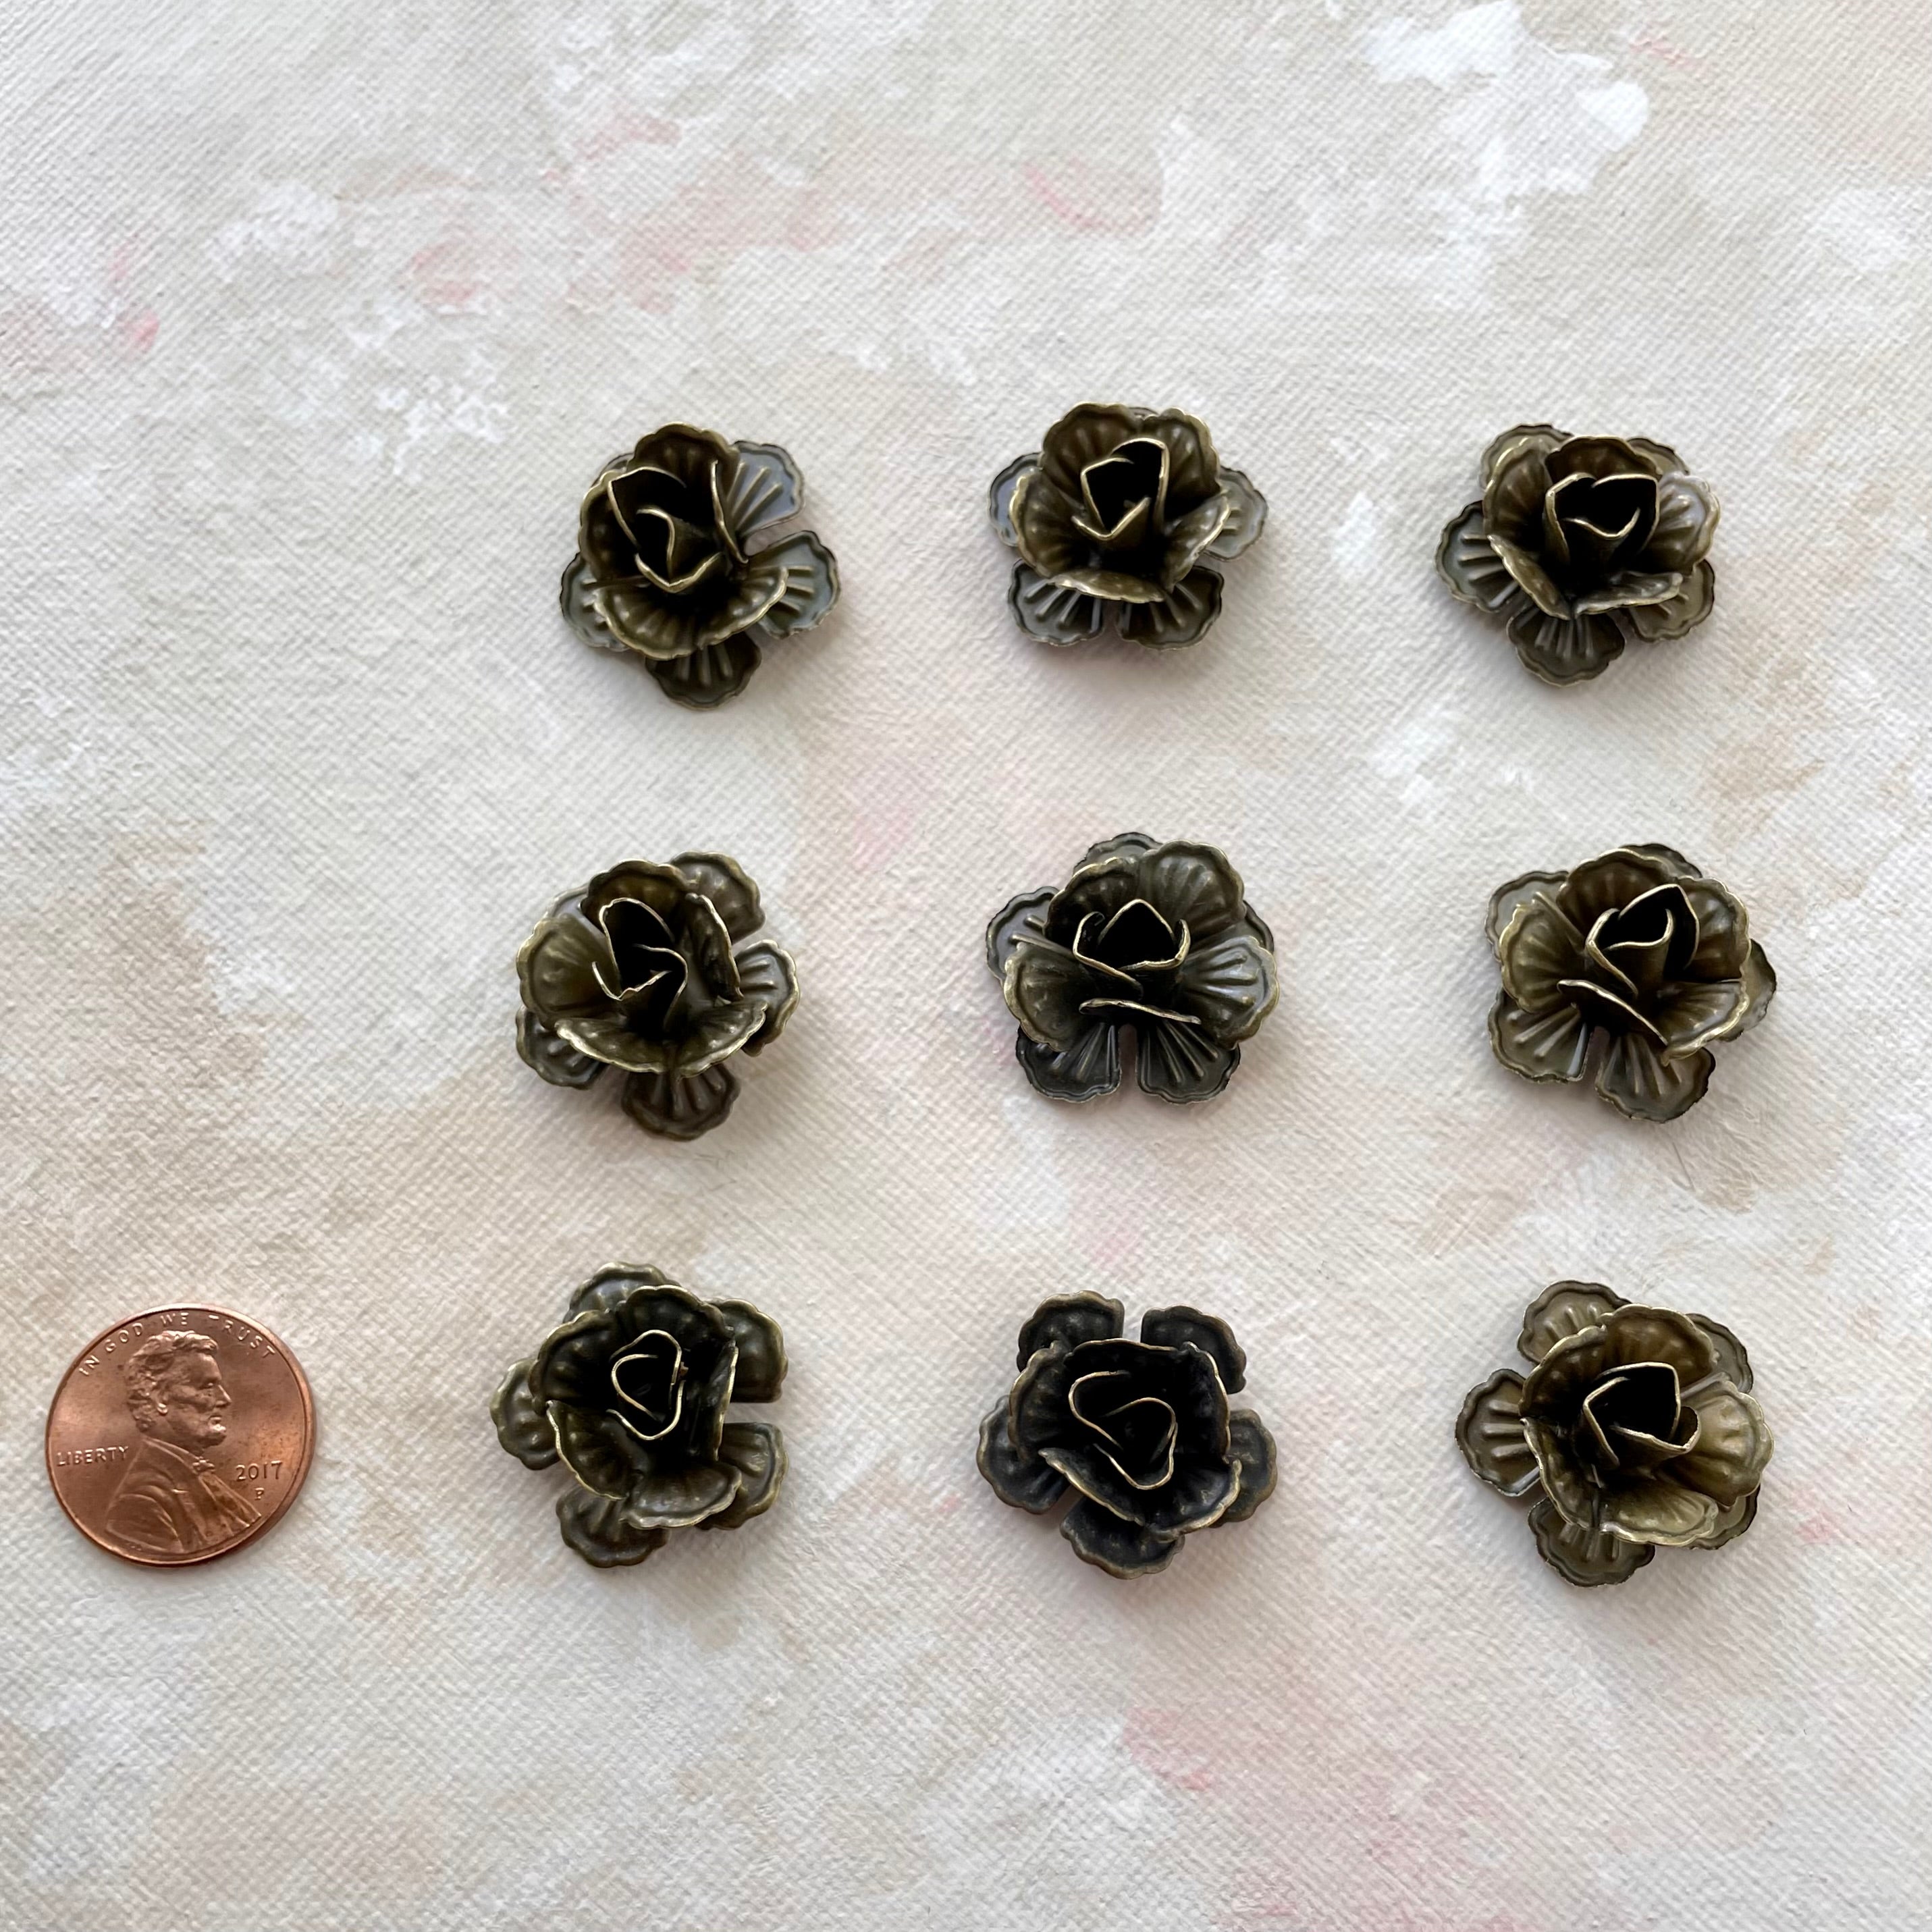 Metal Styling Flowers for Flat Lays